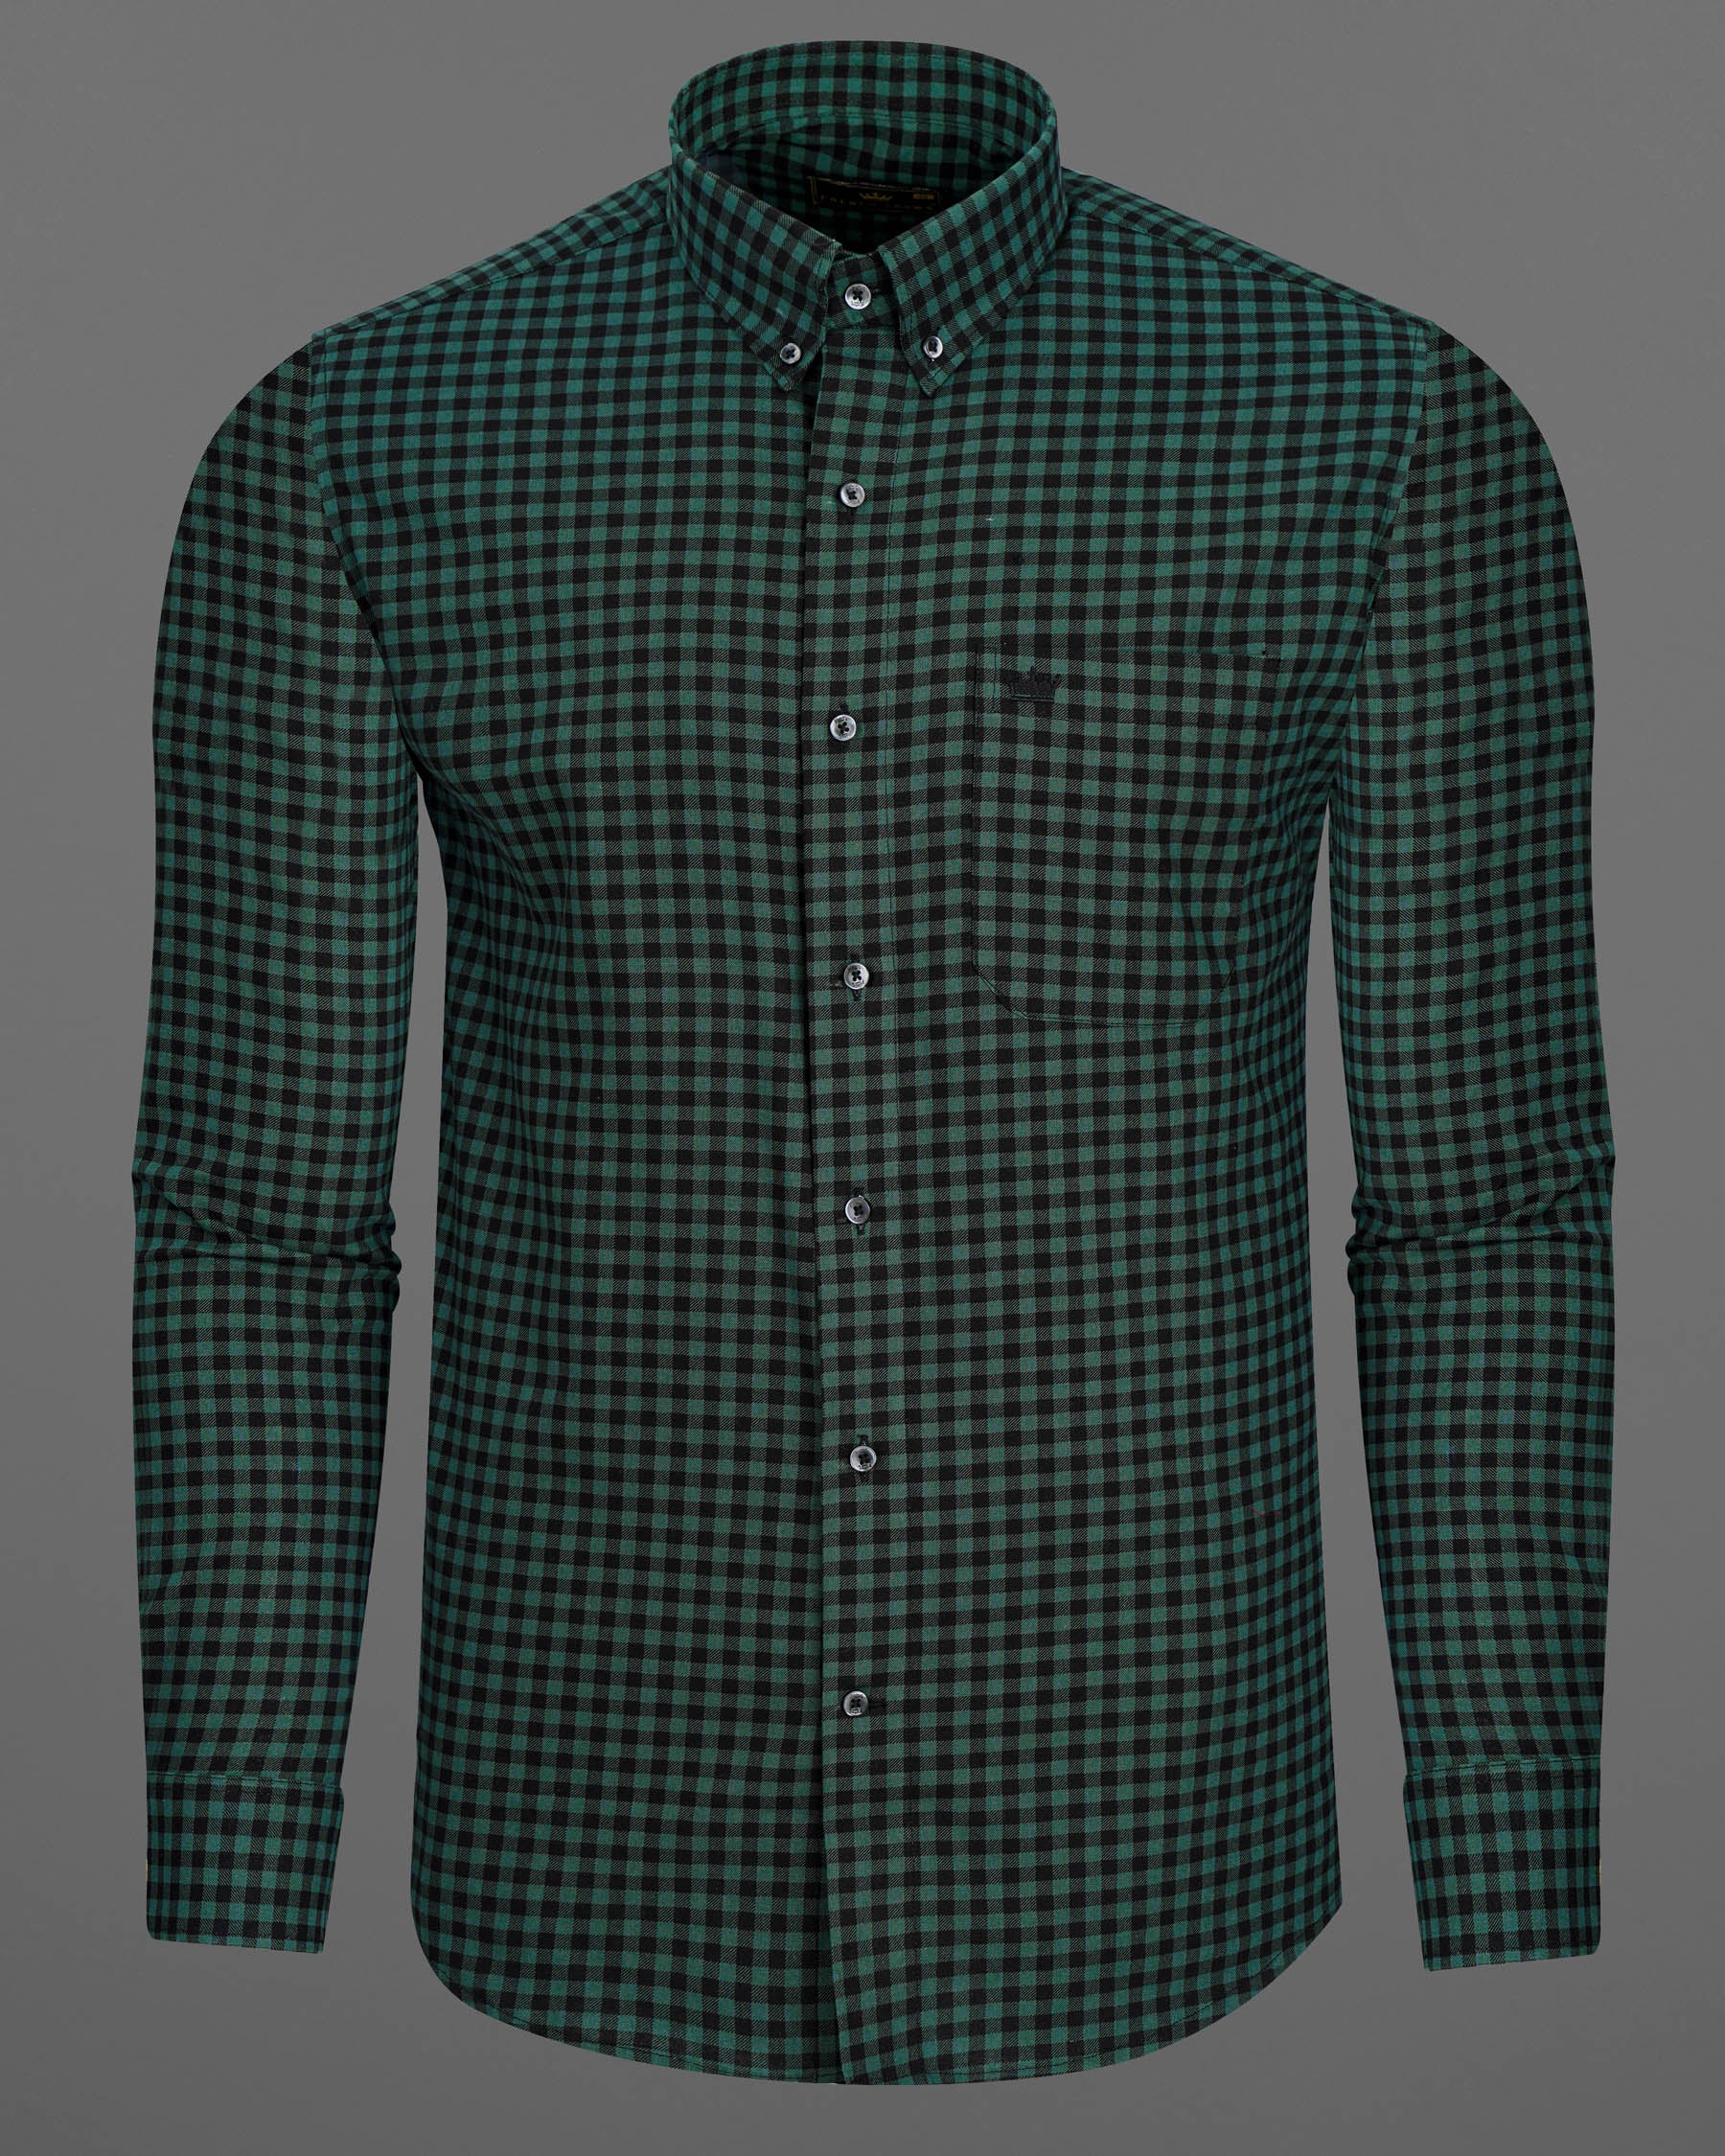 Outer Space Green With Back Gingham Checkered Twill Premium Cotton Shirt 7761-BD-BLK-38, 7761-BD-BLK-H-38, 7761-BD-BLK-39, 7761-BD-BLK-H-39, 7761-BD-BLK-40, 7761-BD-BLK-H-40, 7761-BD-BLK-42, 7761-BD-BLK-H-42, 7761-BD-BLK-44, 7761-BD-BLK-H-44, 7761-BD-BLK-46, 7761-BD-BLK-H-46, 7761-BD-BLK-48, 7761-BD-BLK-H-48, 7761-BD-BLK-50, 7761-BD-BLK-H-50, 7761-BD-BLK-52, 7761-BD-BLK-H-52